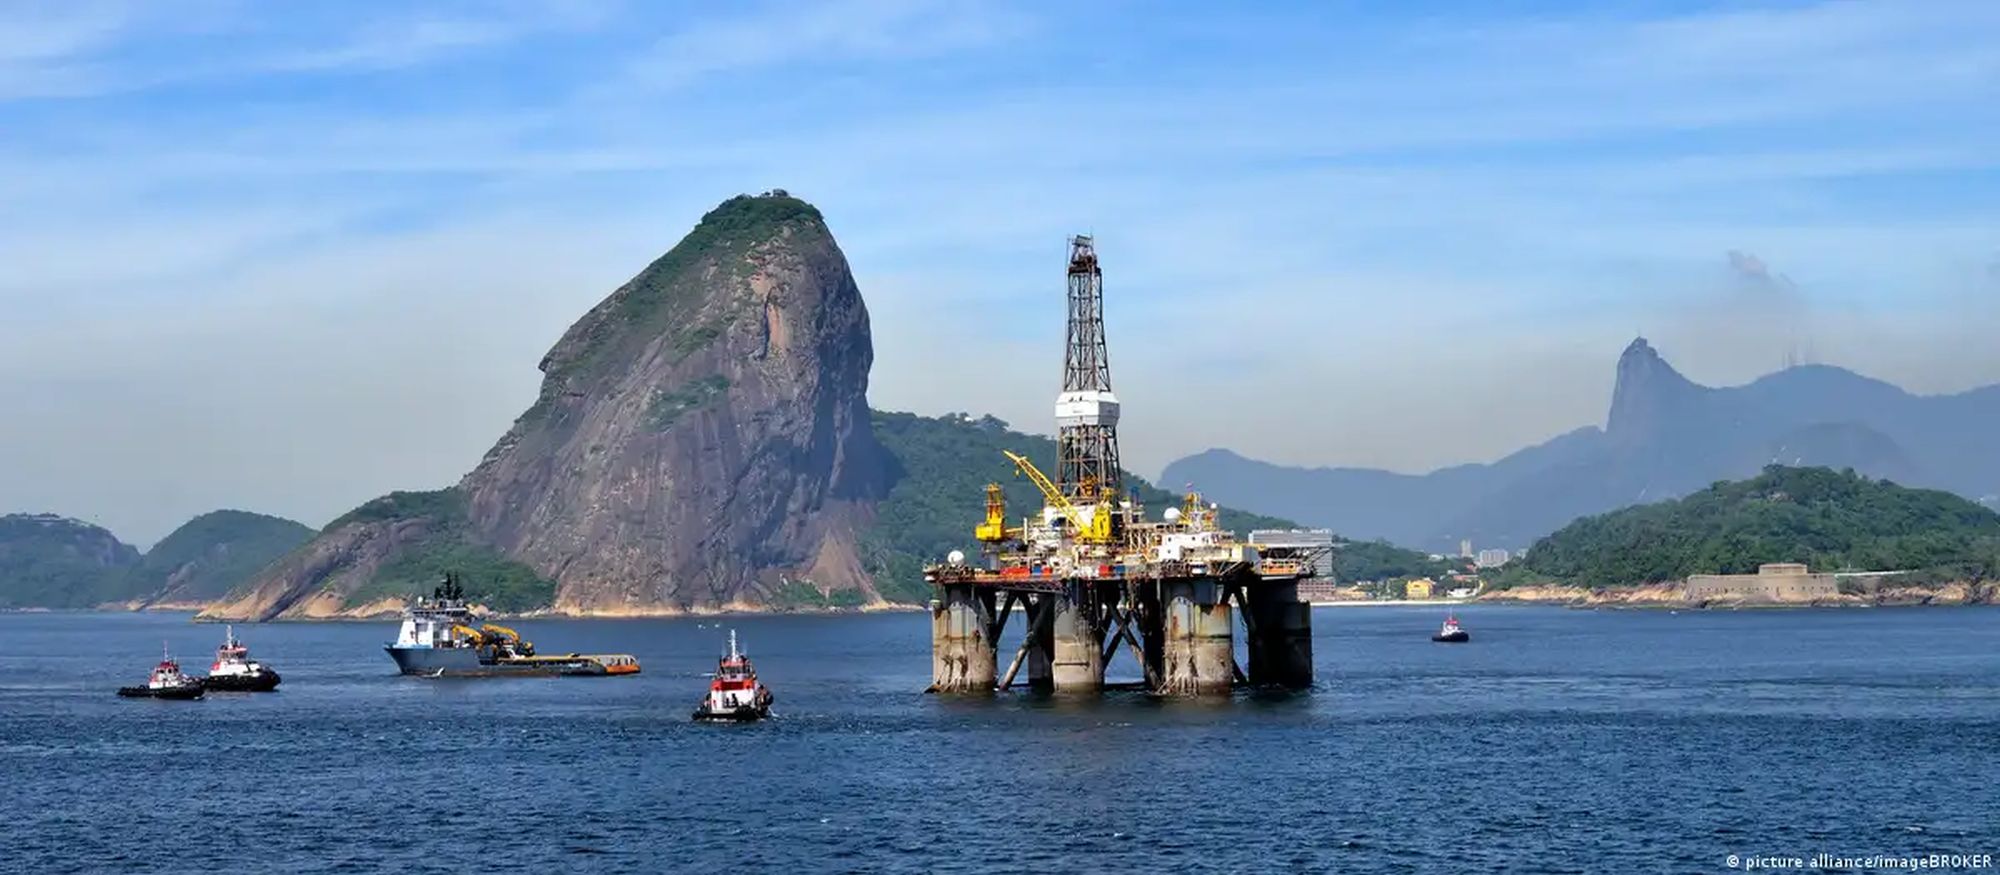 A picture of an oil platform operated by Brazil's Petrobras in the bay of Guanabara in Rio de Janeiro/picture alliance/imageBROKER